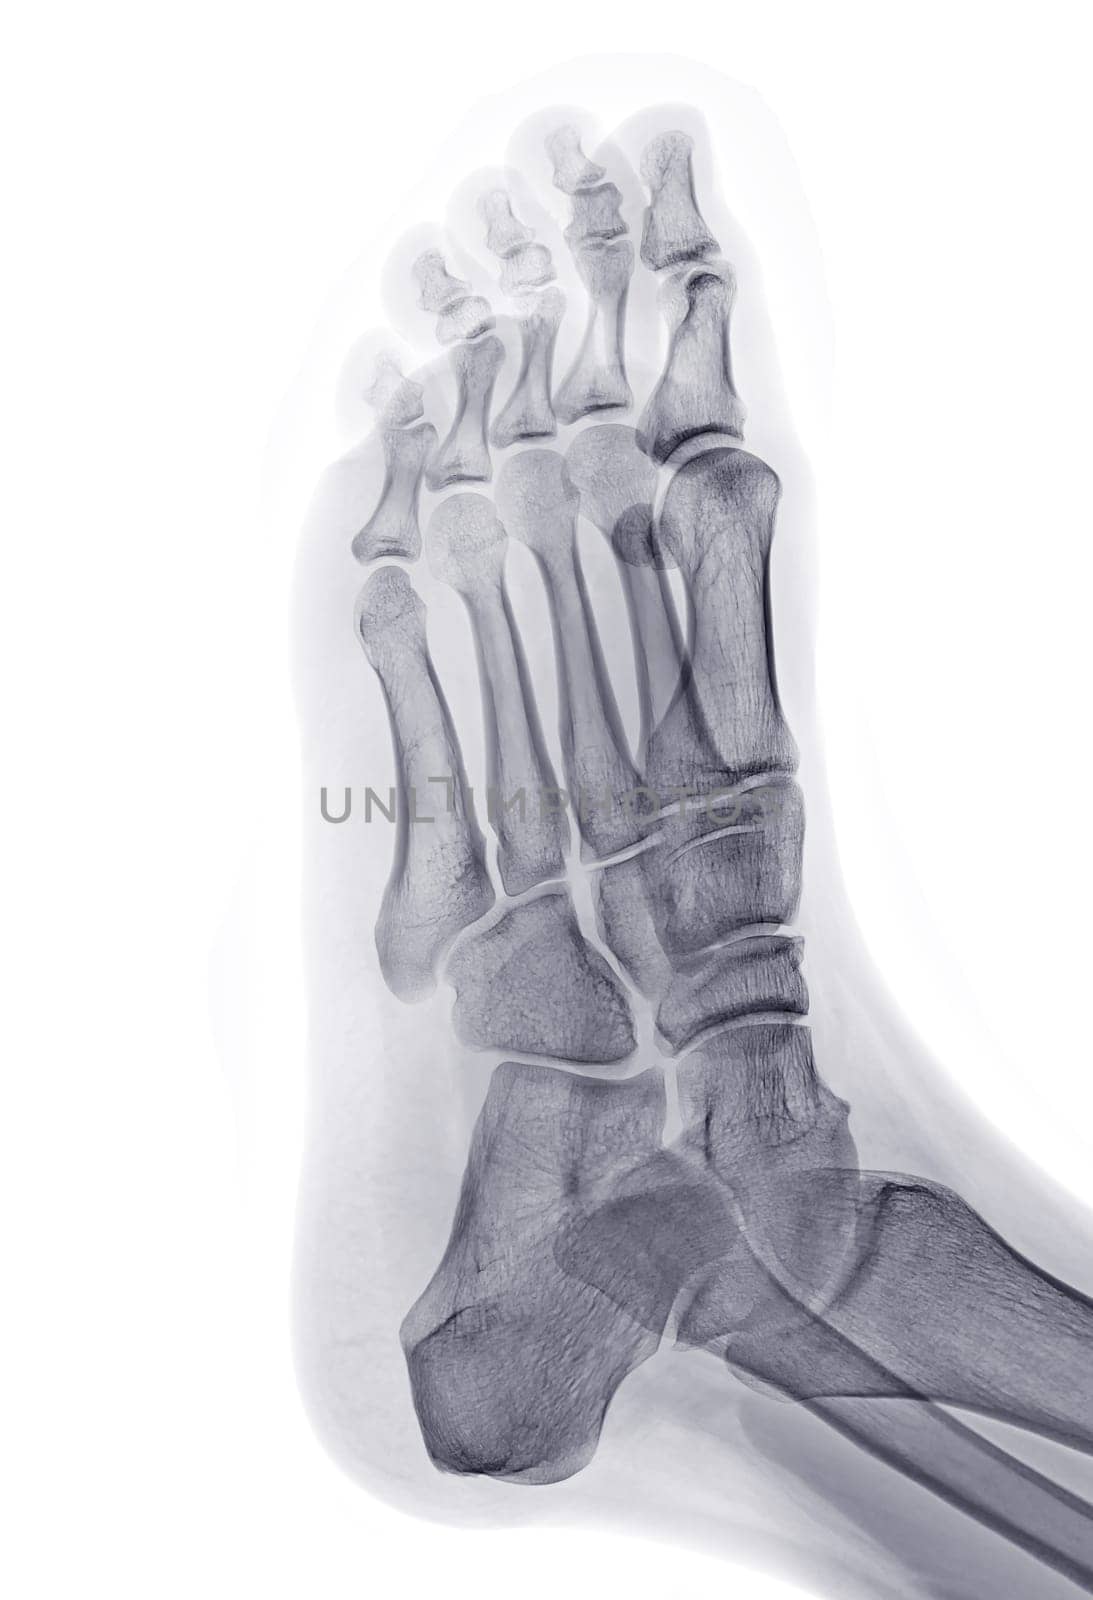 Foot x-ray image Oblique  view  isolated on White  background.
